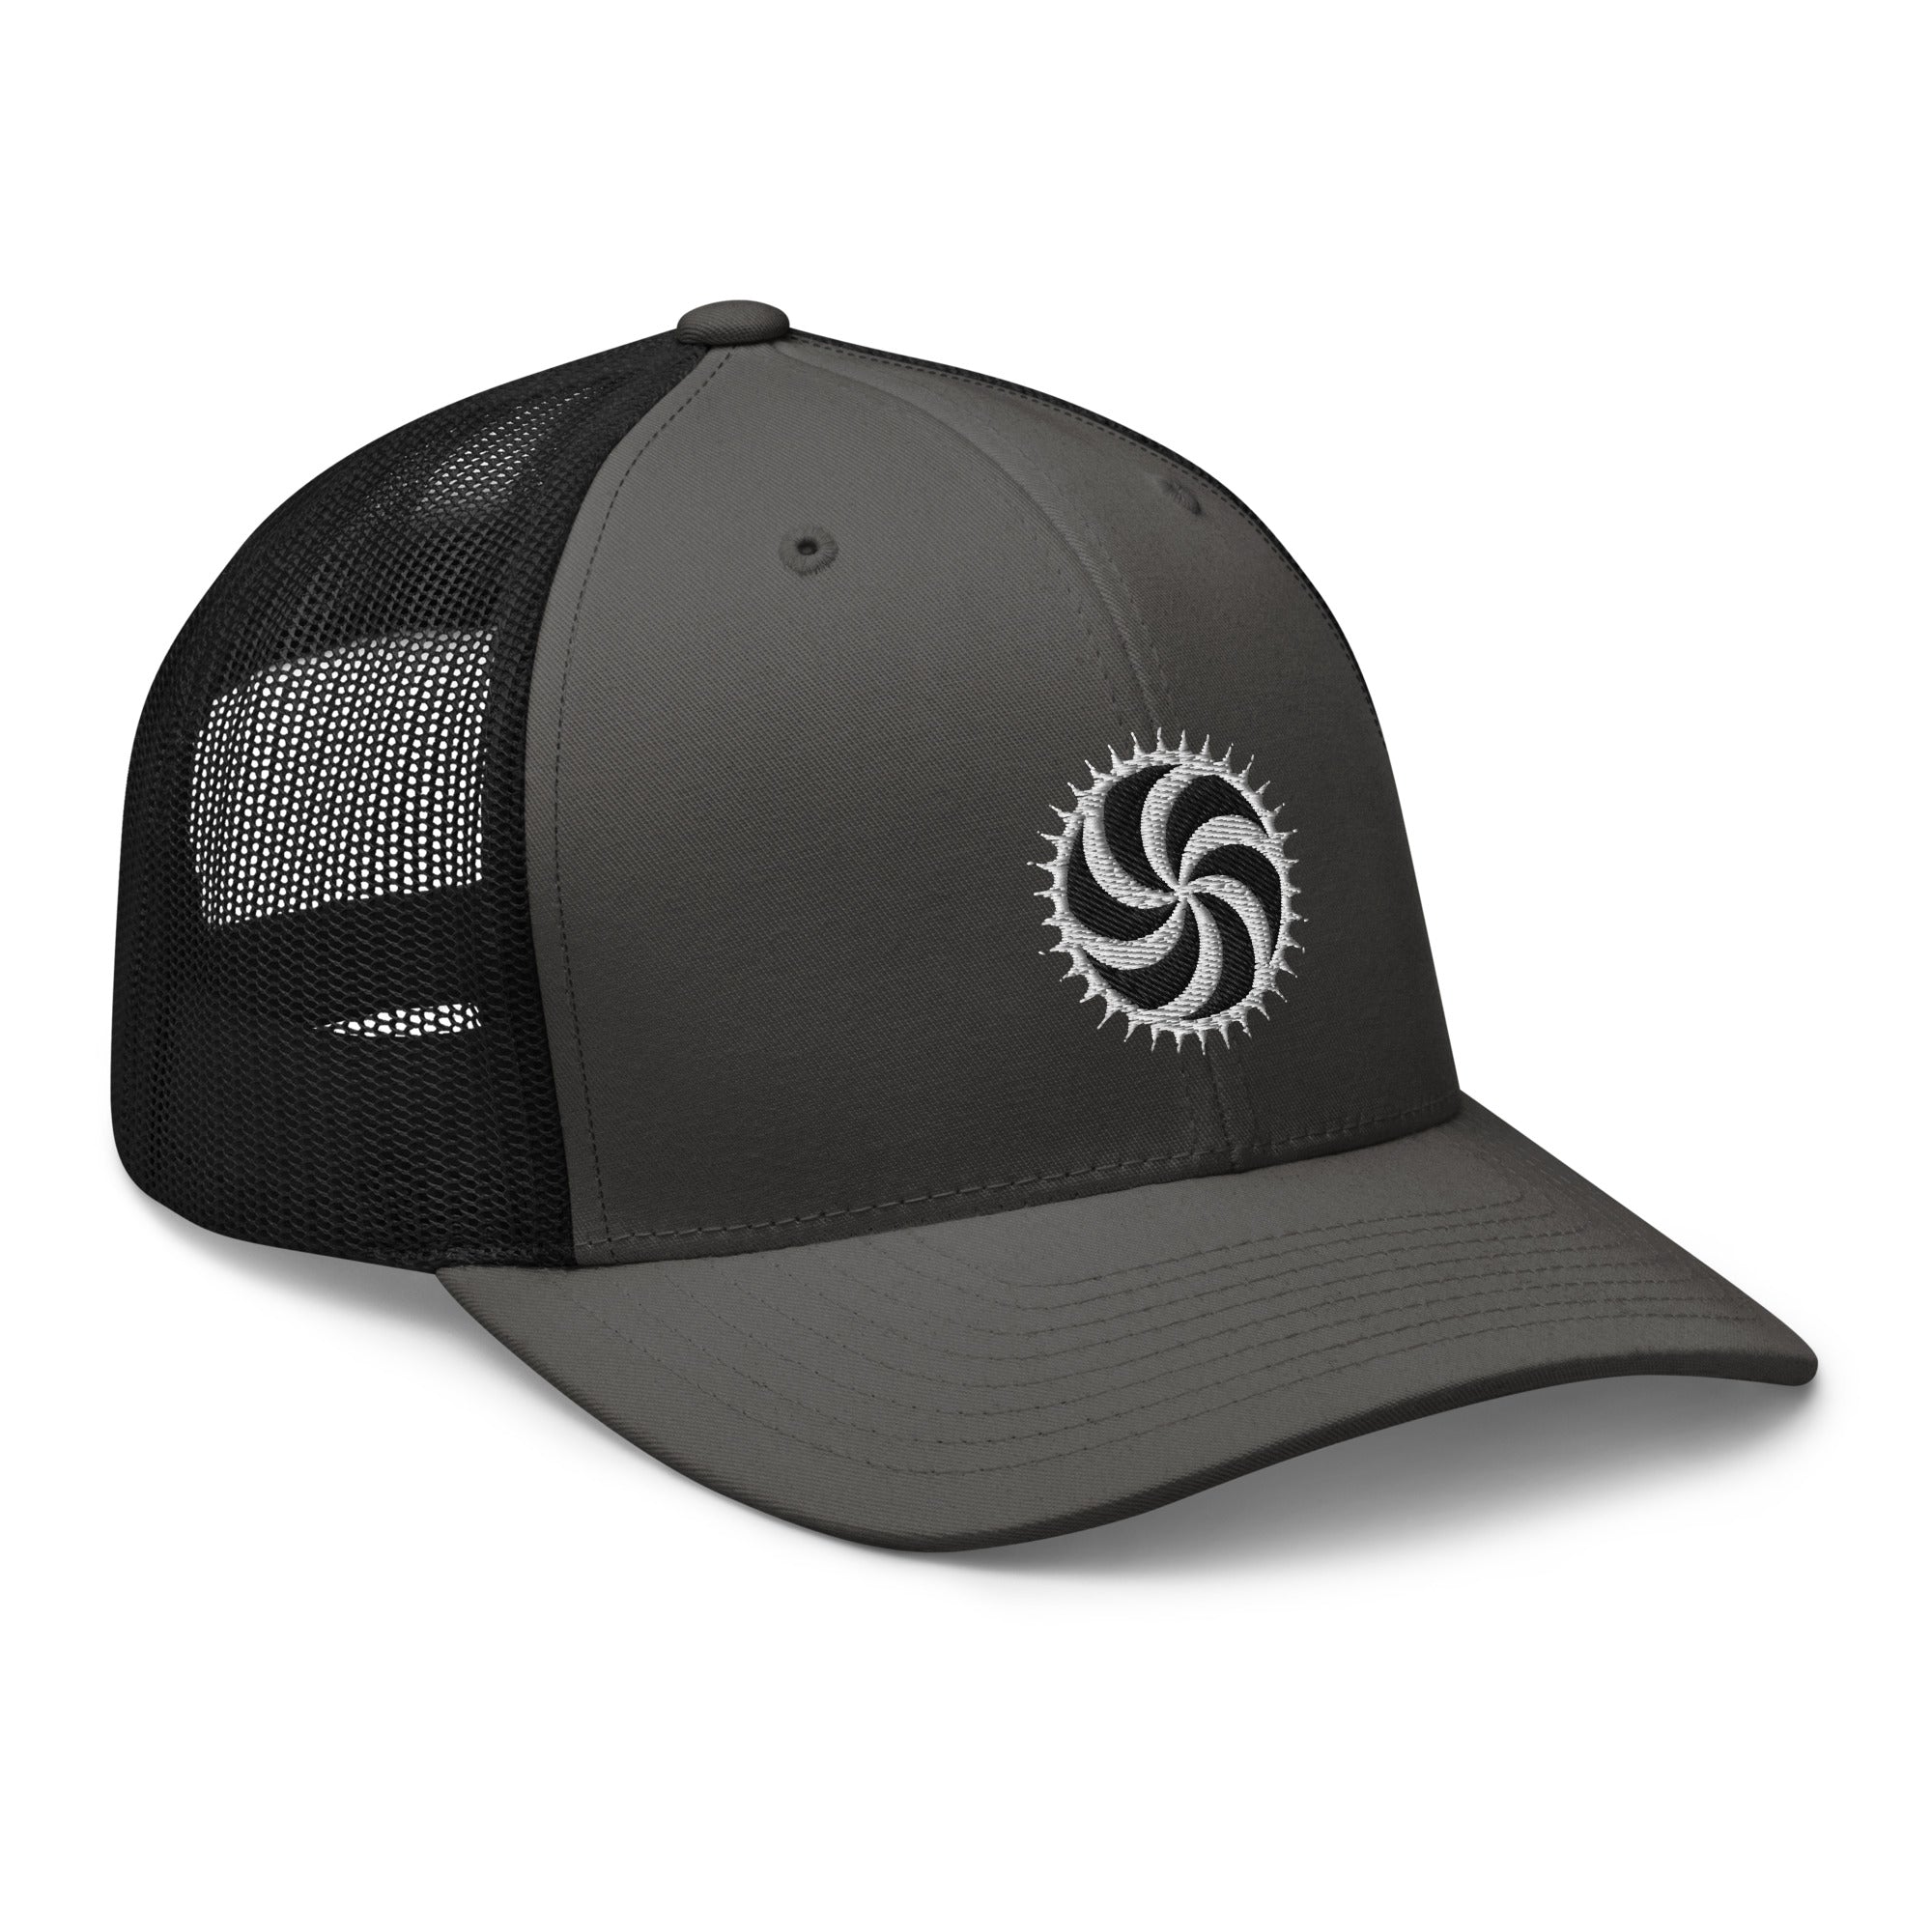 White Deadly Swirl Spike Symbol Embroidered Trucker Cap Snapback Hat